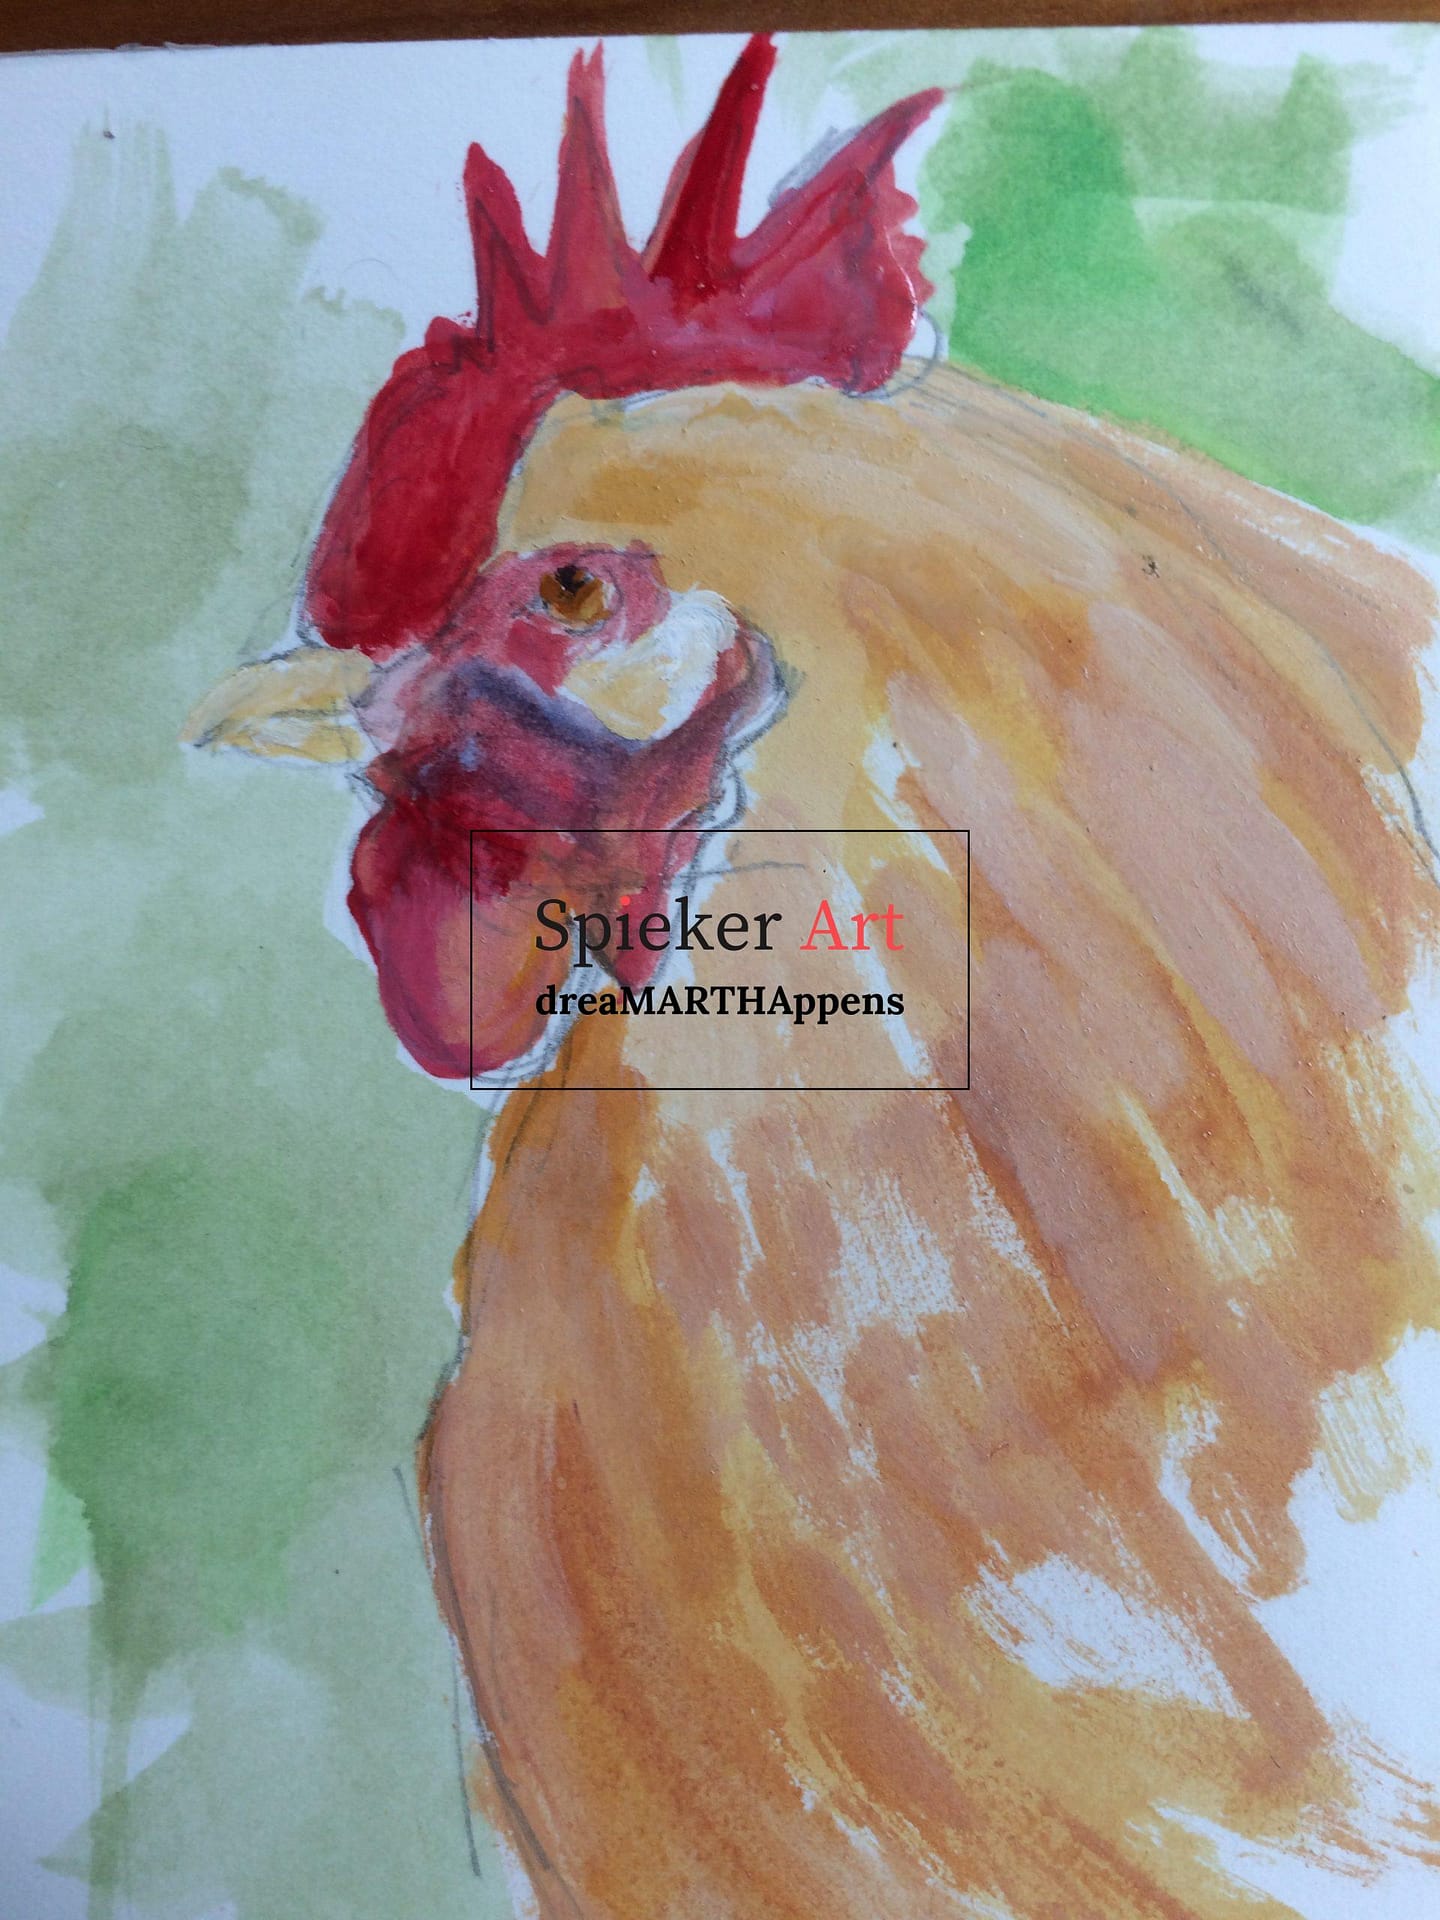 gouache painting of tan chicken with red comb